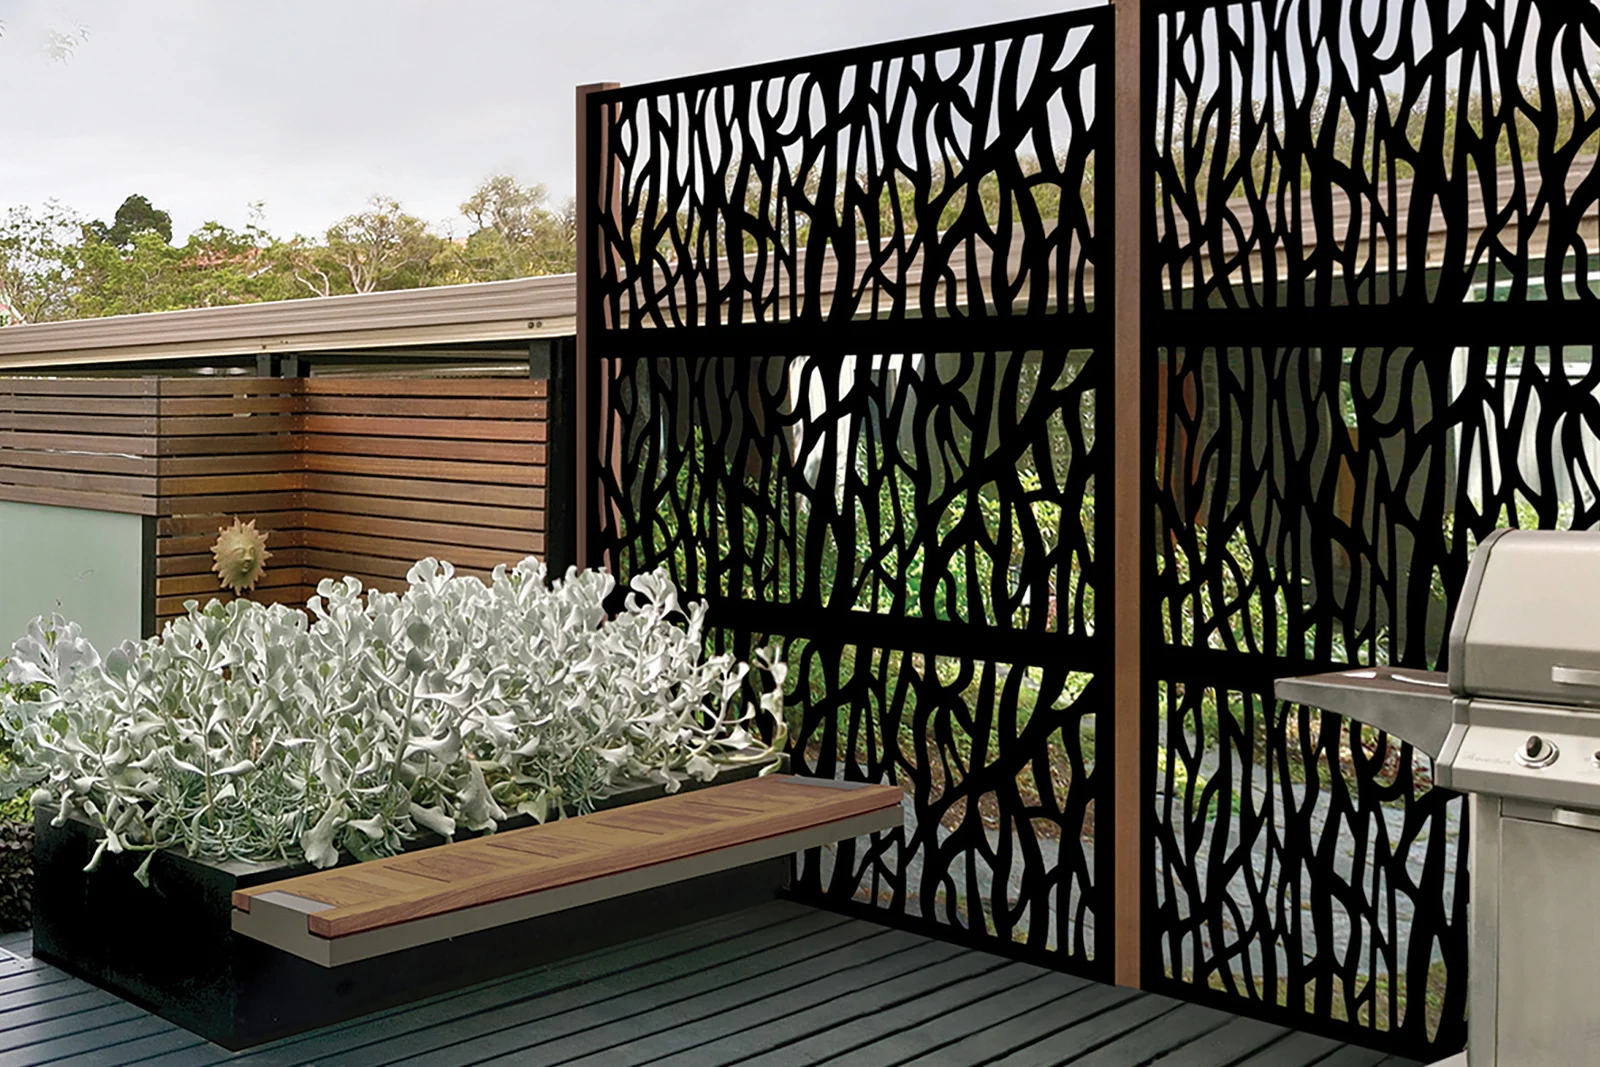 A deck with a decorative fence